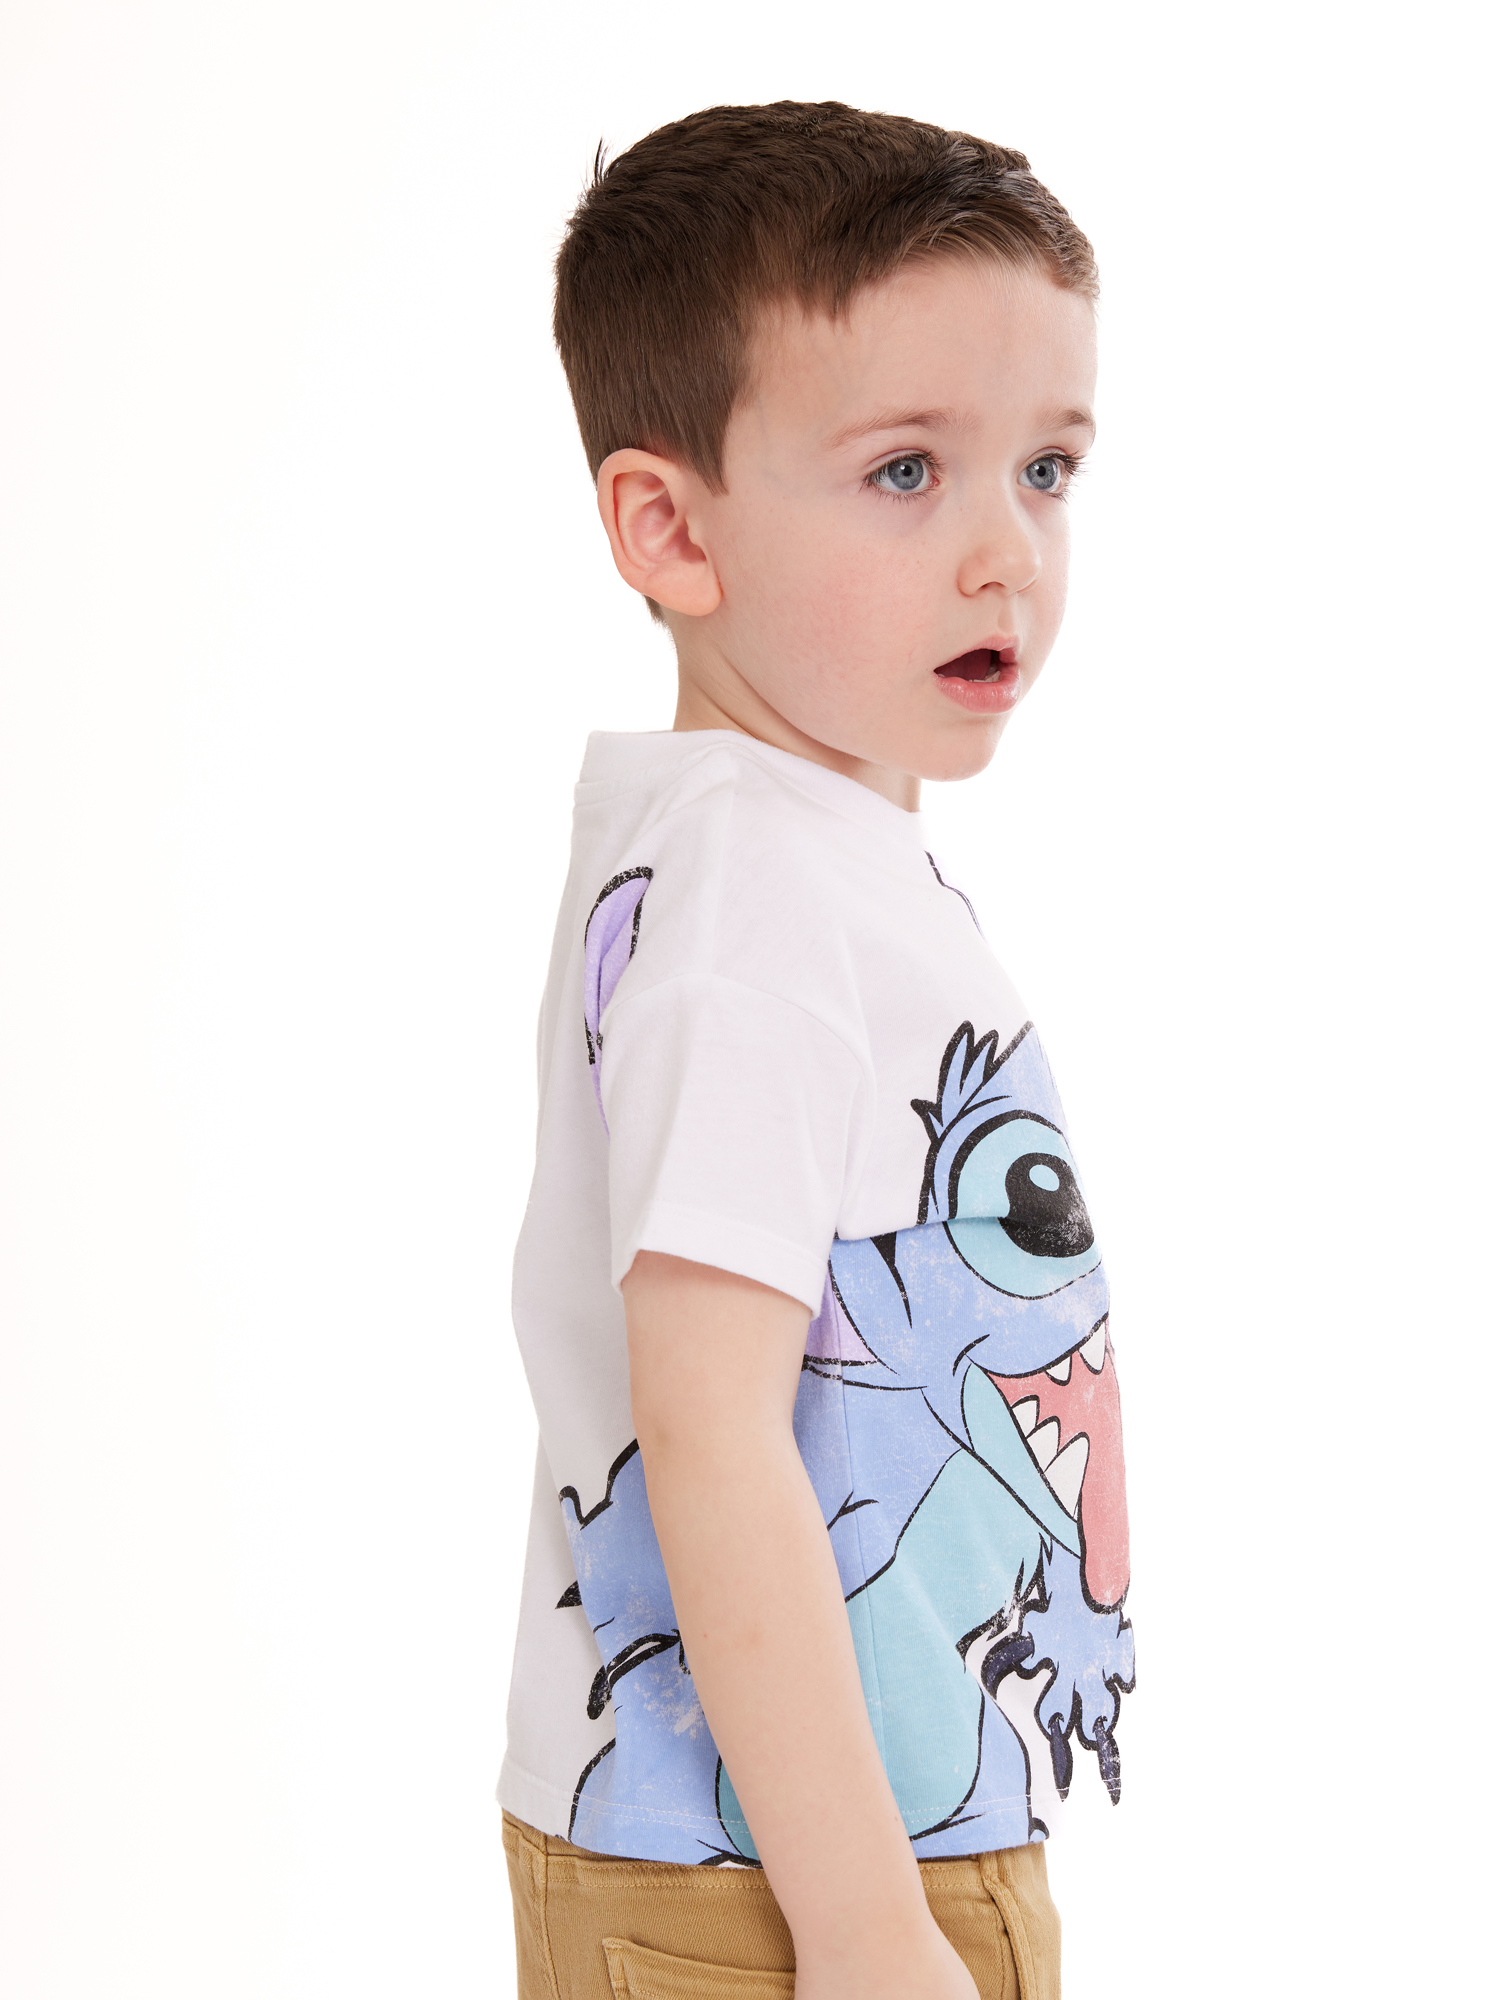 Stitch Toddler Boy Graphic Tees, 2-Pack, Sizes 2T-5T - image 5 of 8